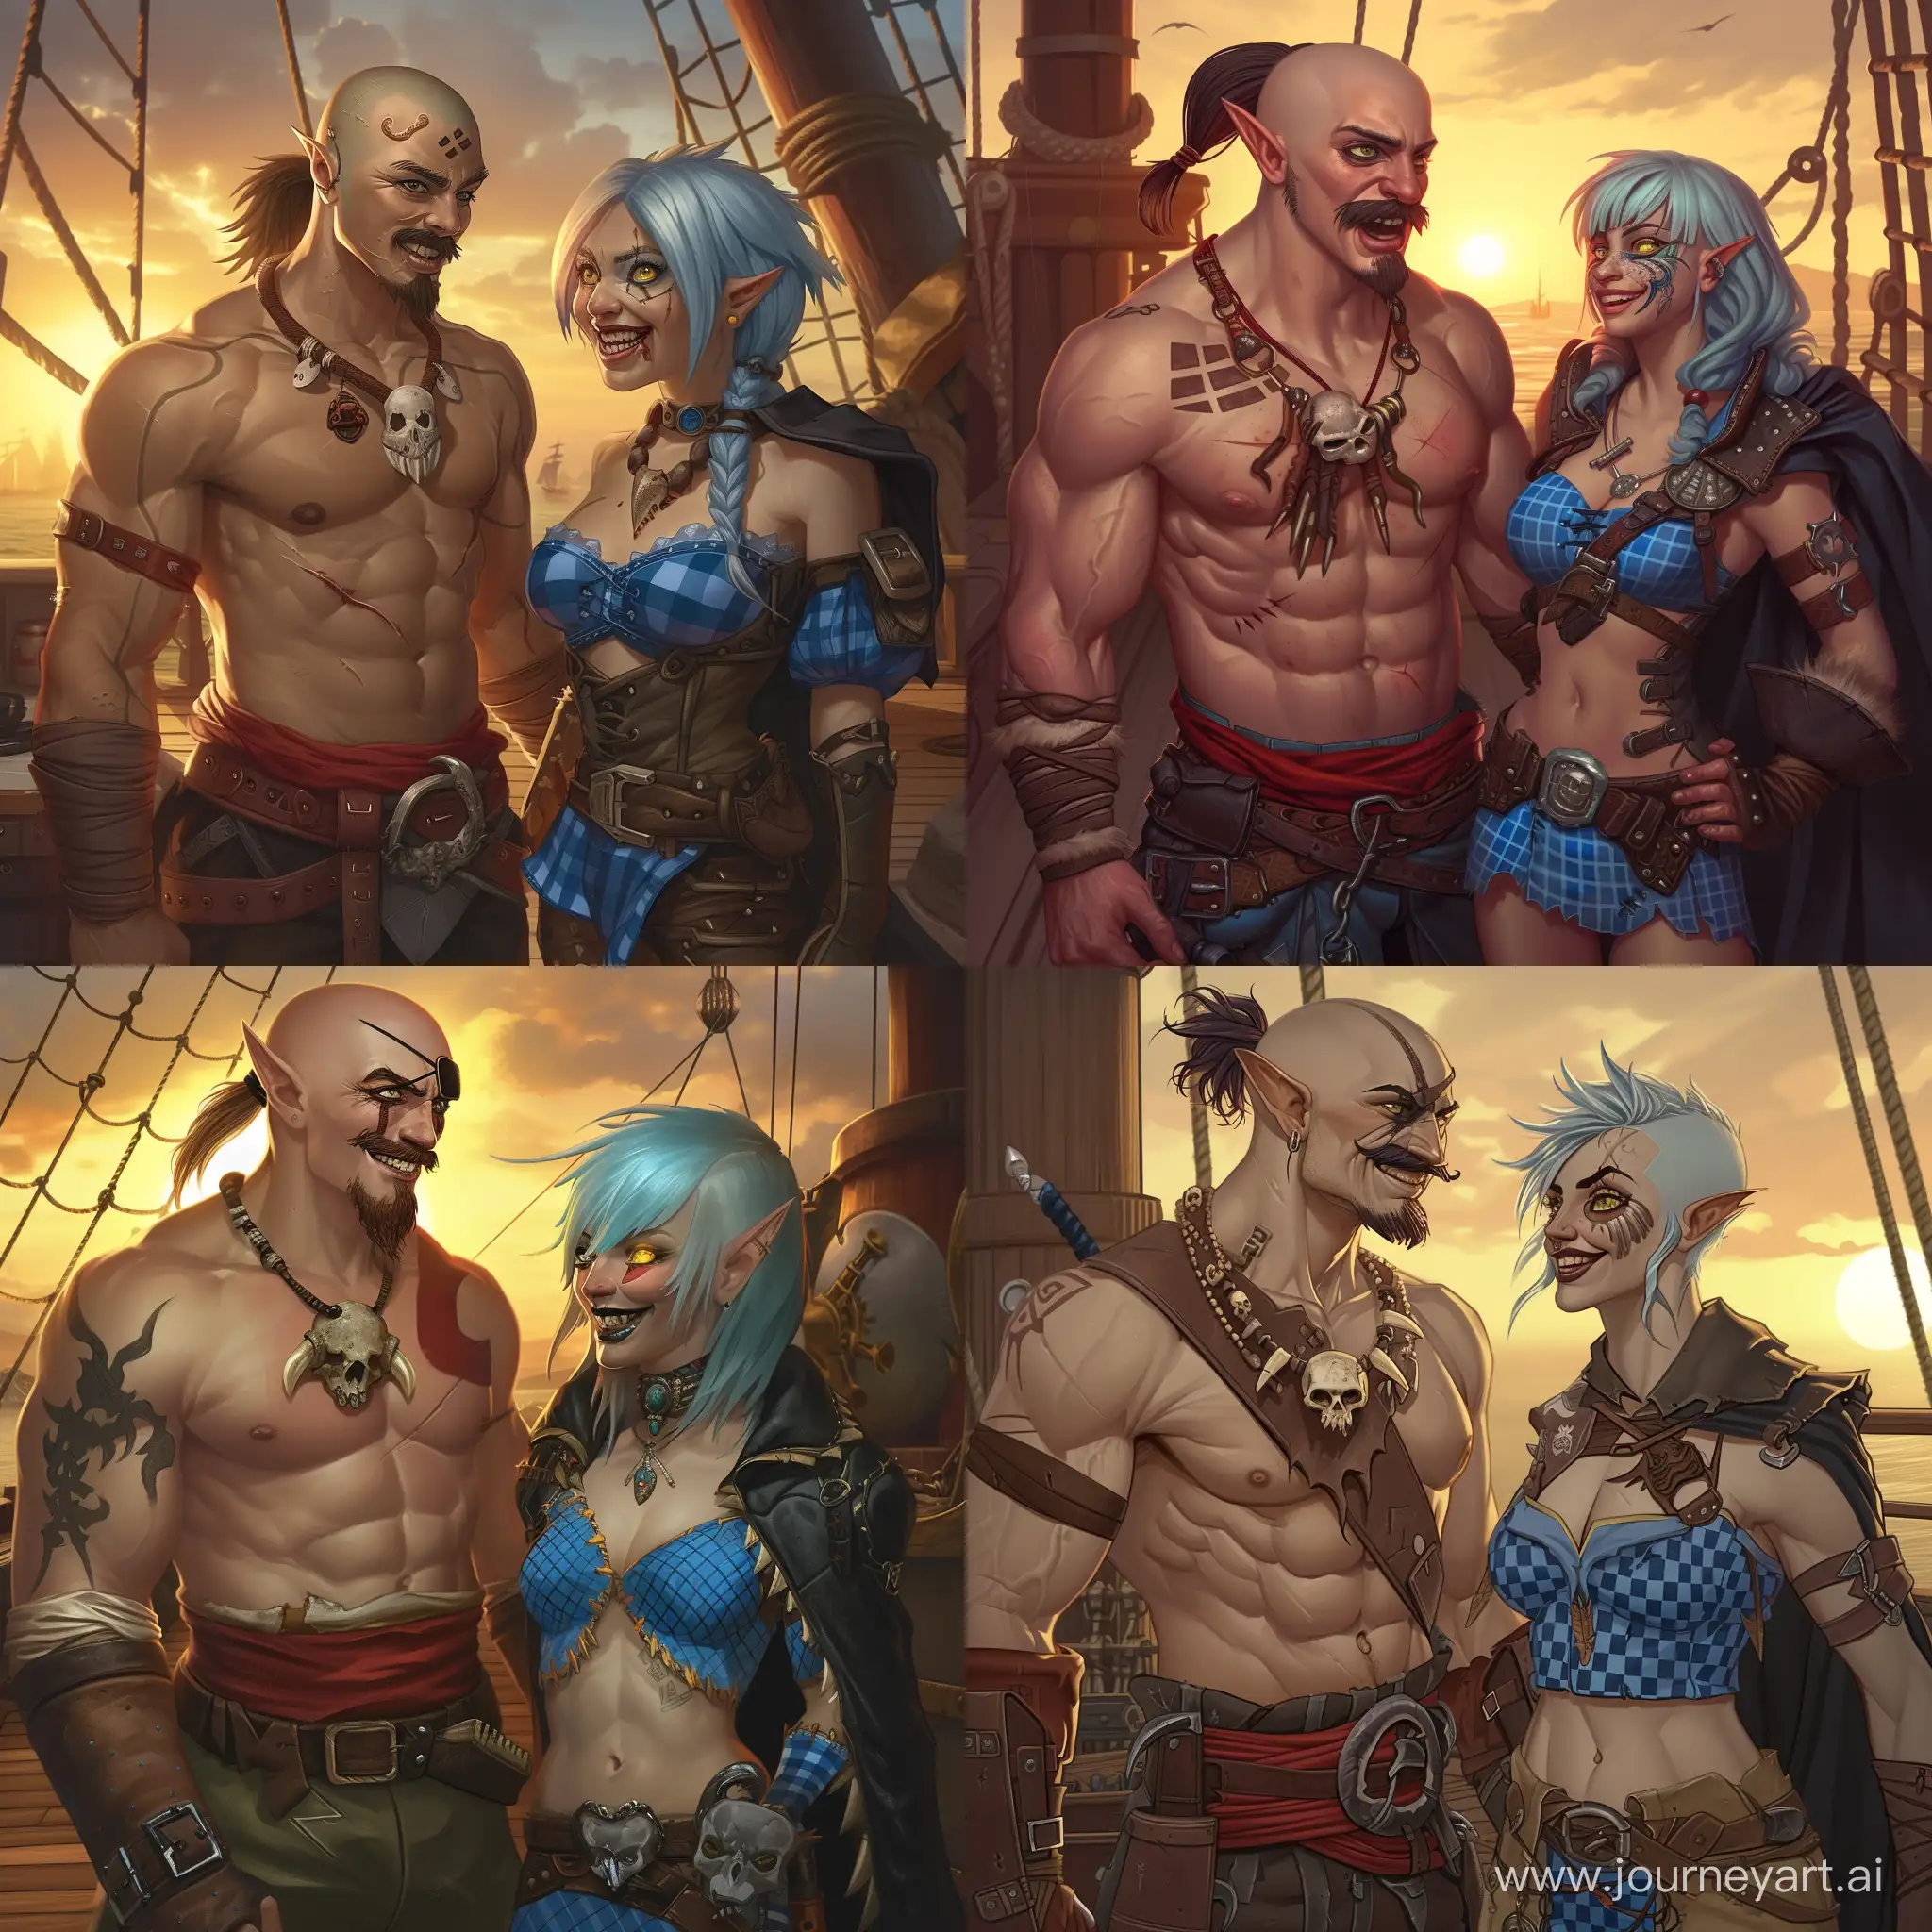 Draw a realistic art of two characters from the Dungeons and Dragons universe having a conversation. 
First is a muscular human warrior, tall and very athletic. He has a cossack forelock on his bald head and a mustache. His young face is clean shaven. His eyes are black with green iris. One eye is covered with a pirate eyepatch. His chest is bare with a large red belt on his waist . He wears a necklace made from animal teeth with a small animal skull in the centre.
Second is a 20 years old elf warlock with over the shoulder length blue hair with silver streaks and yellow eyes. She has light beige skin, and crazed happy smile on her young face.
She is dressed in a leather armor with blue checkered shirt underneath. There is a black cloak behind her back.

They are standing  on the deck of a pirate ship, with sun setting in the background